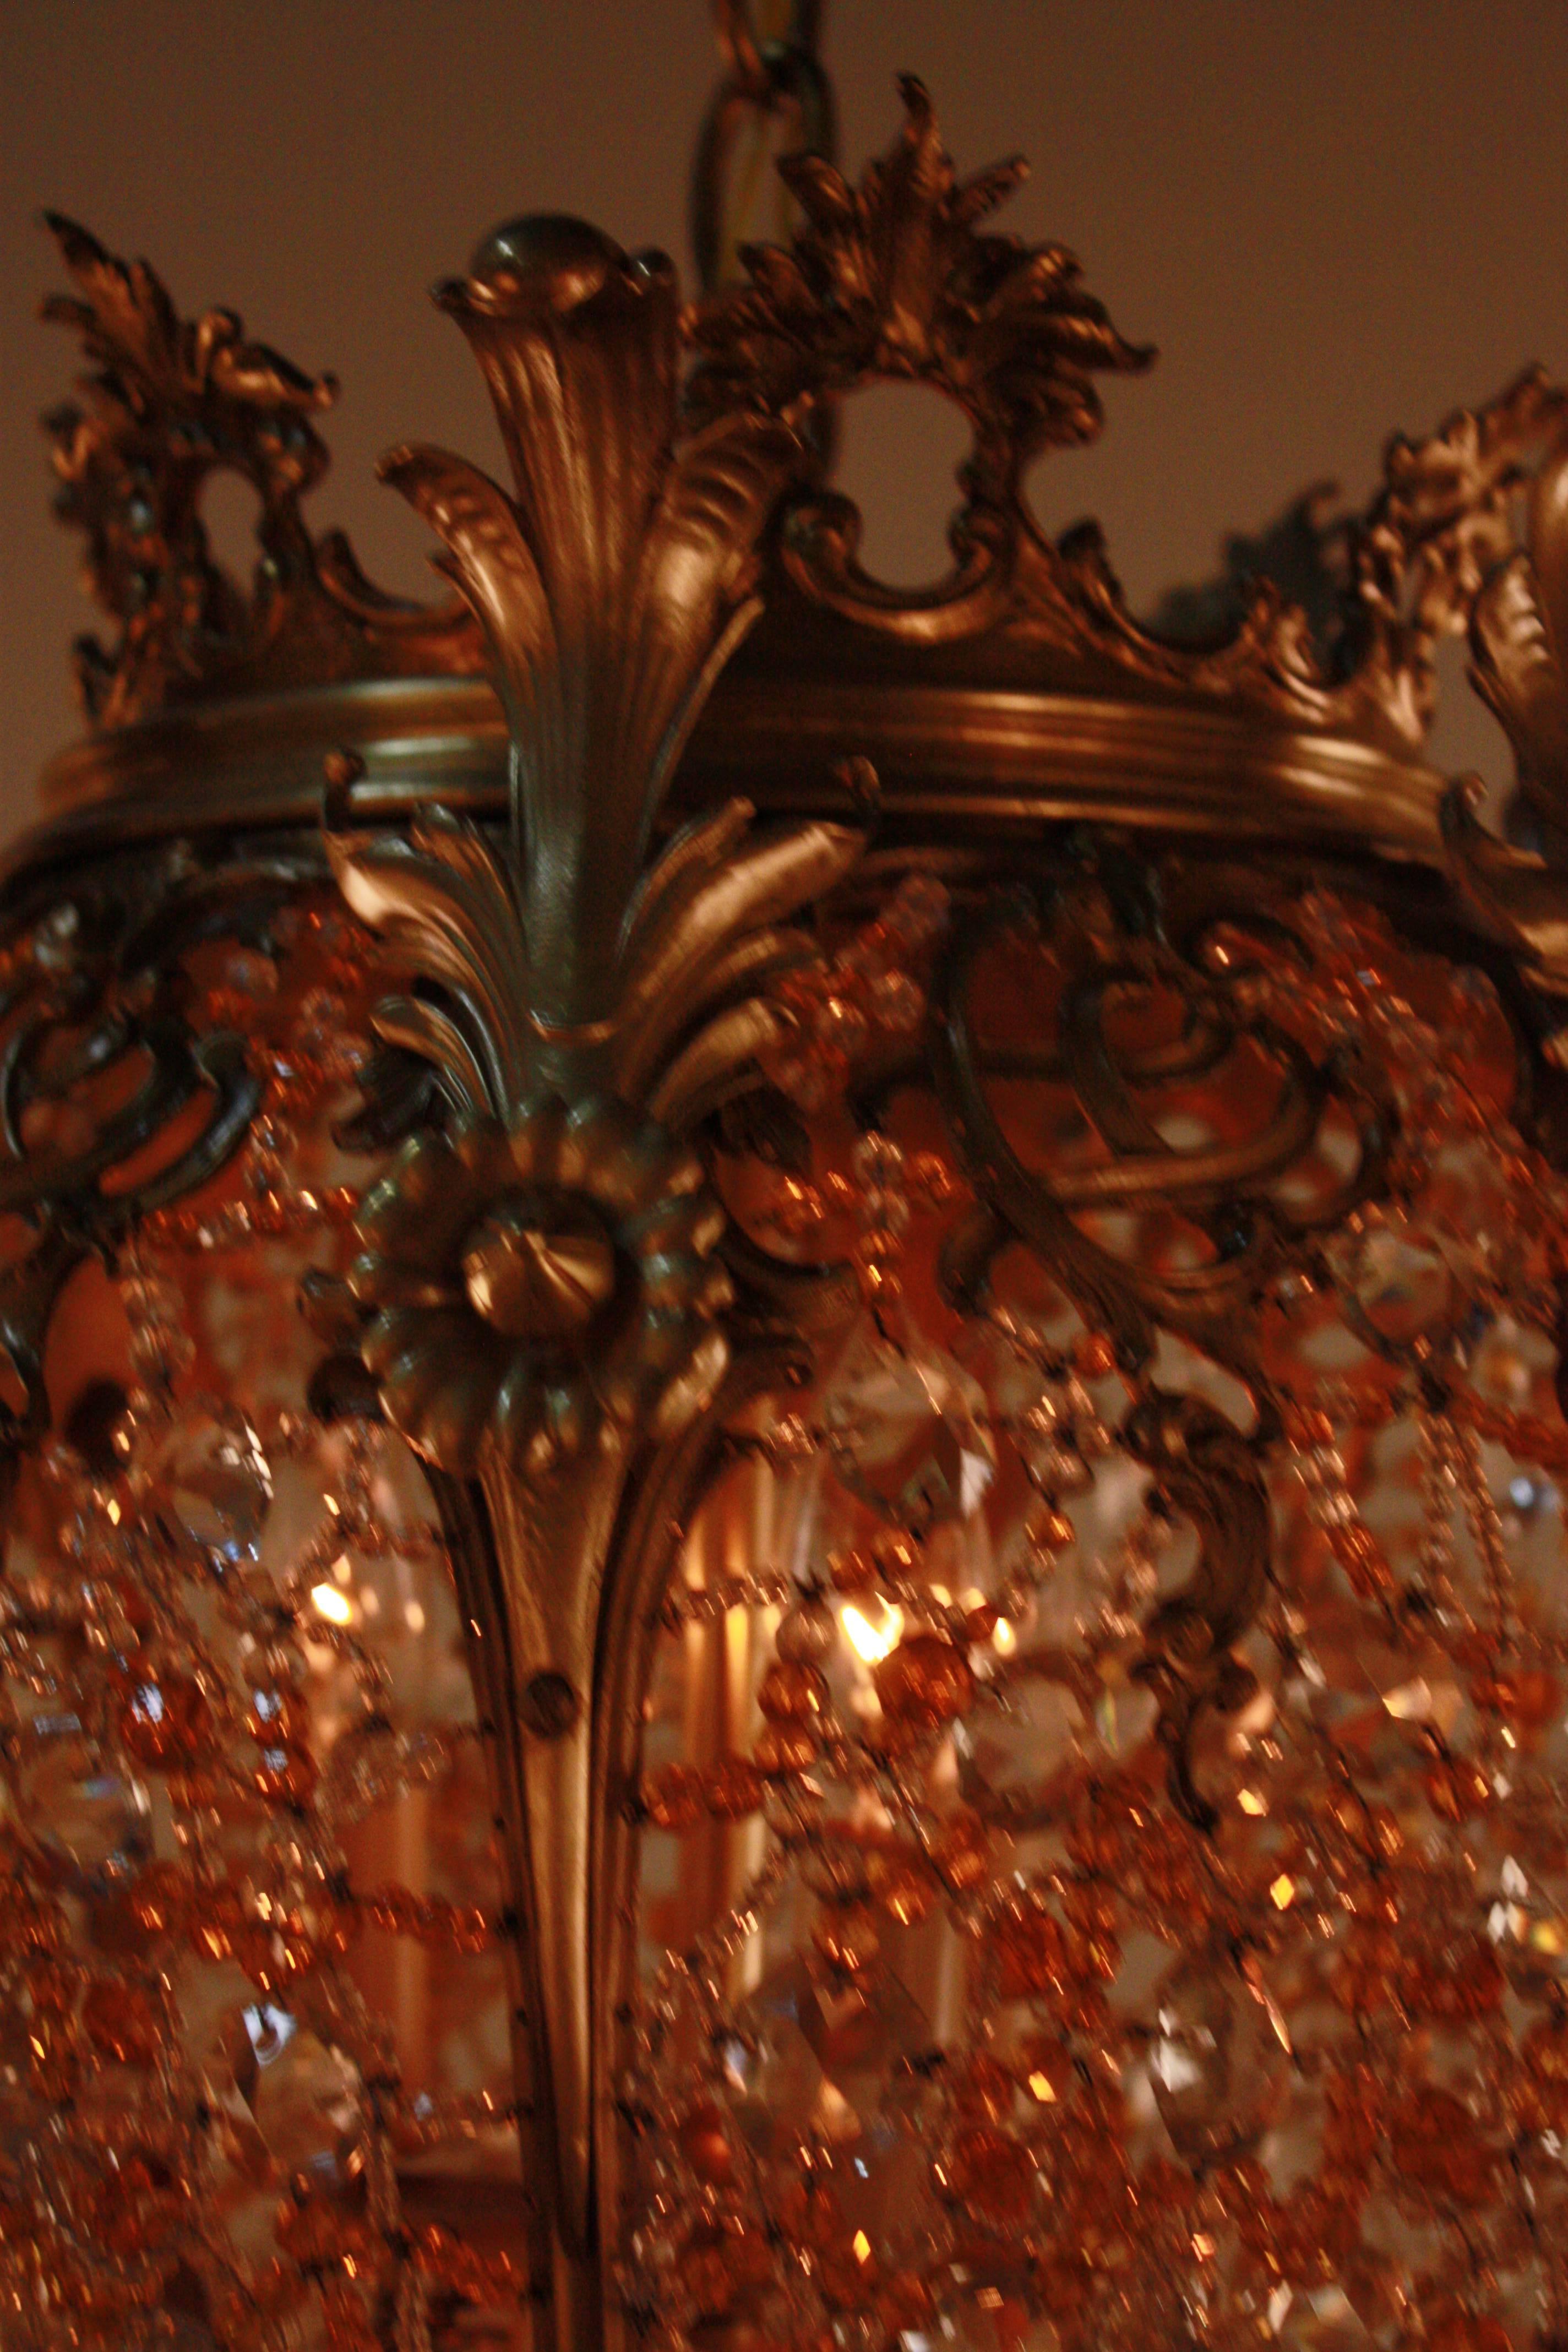 Mid-20th Century French Crystal and Bronze Chandelier